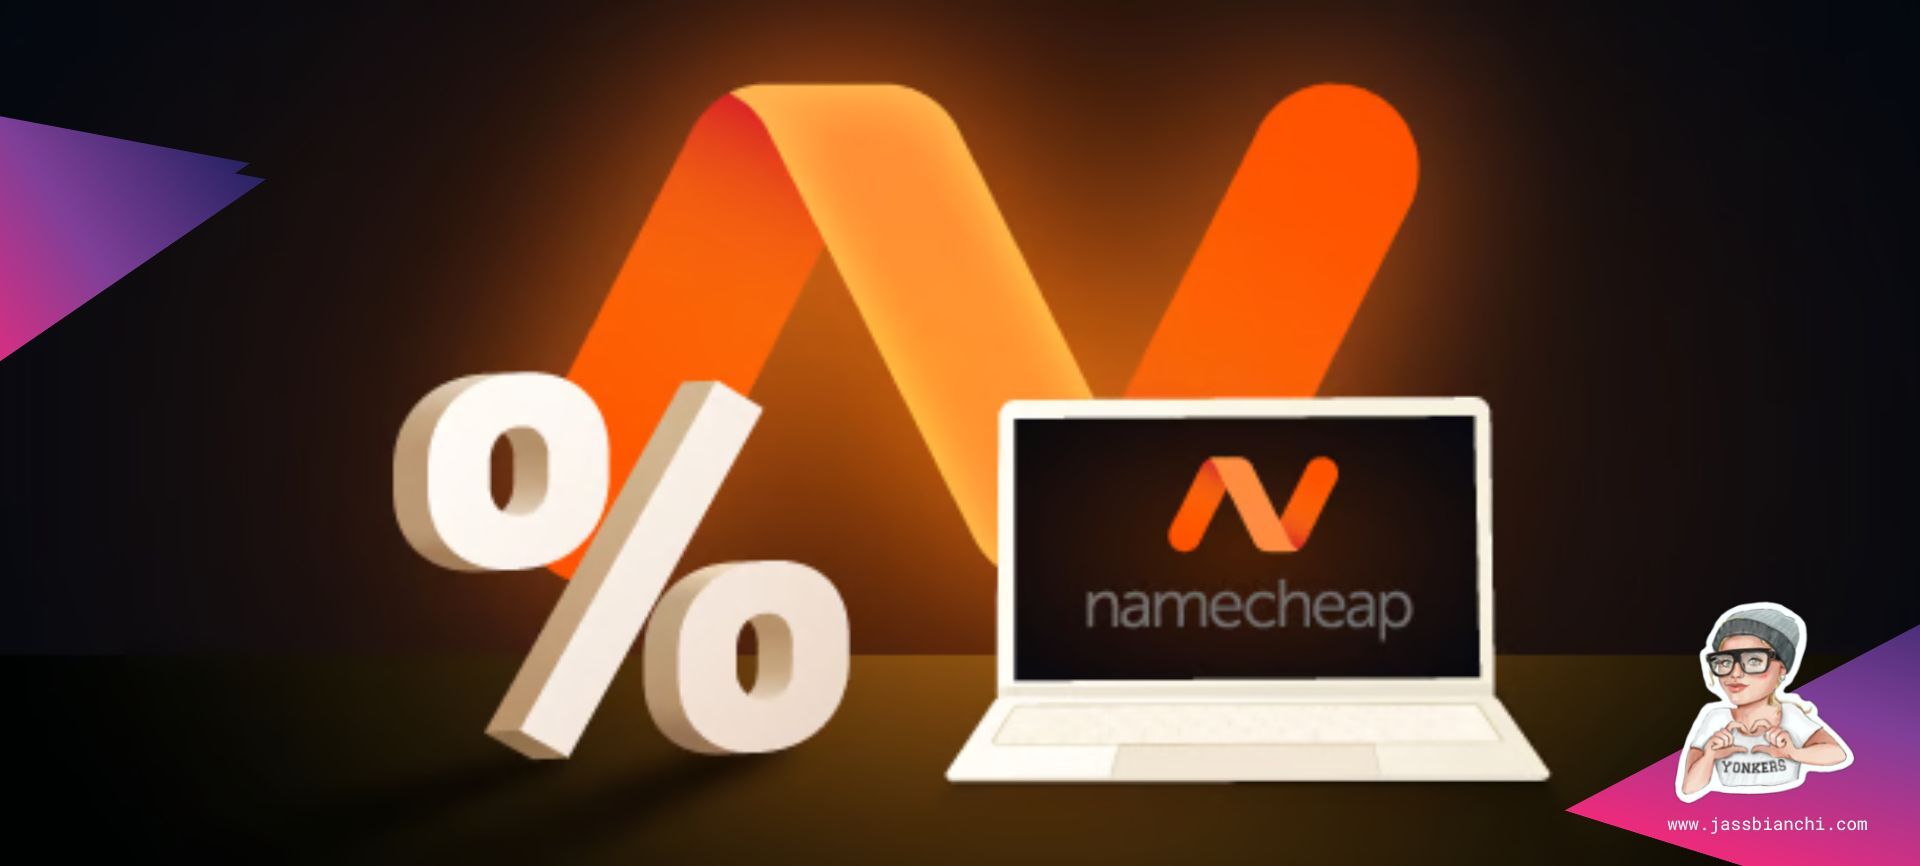 Namecheap: The Best Web Hosting Company for Small Business in 2023